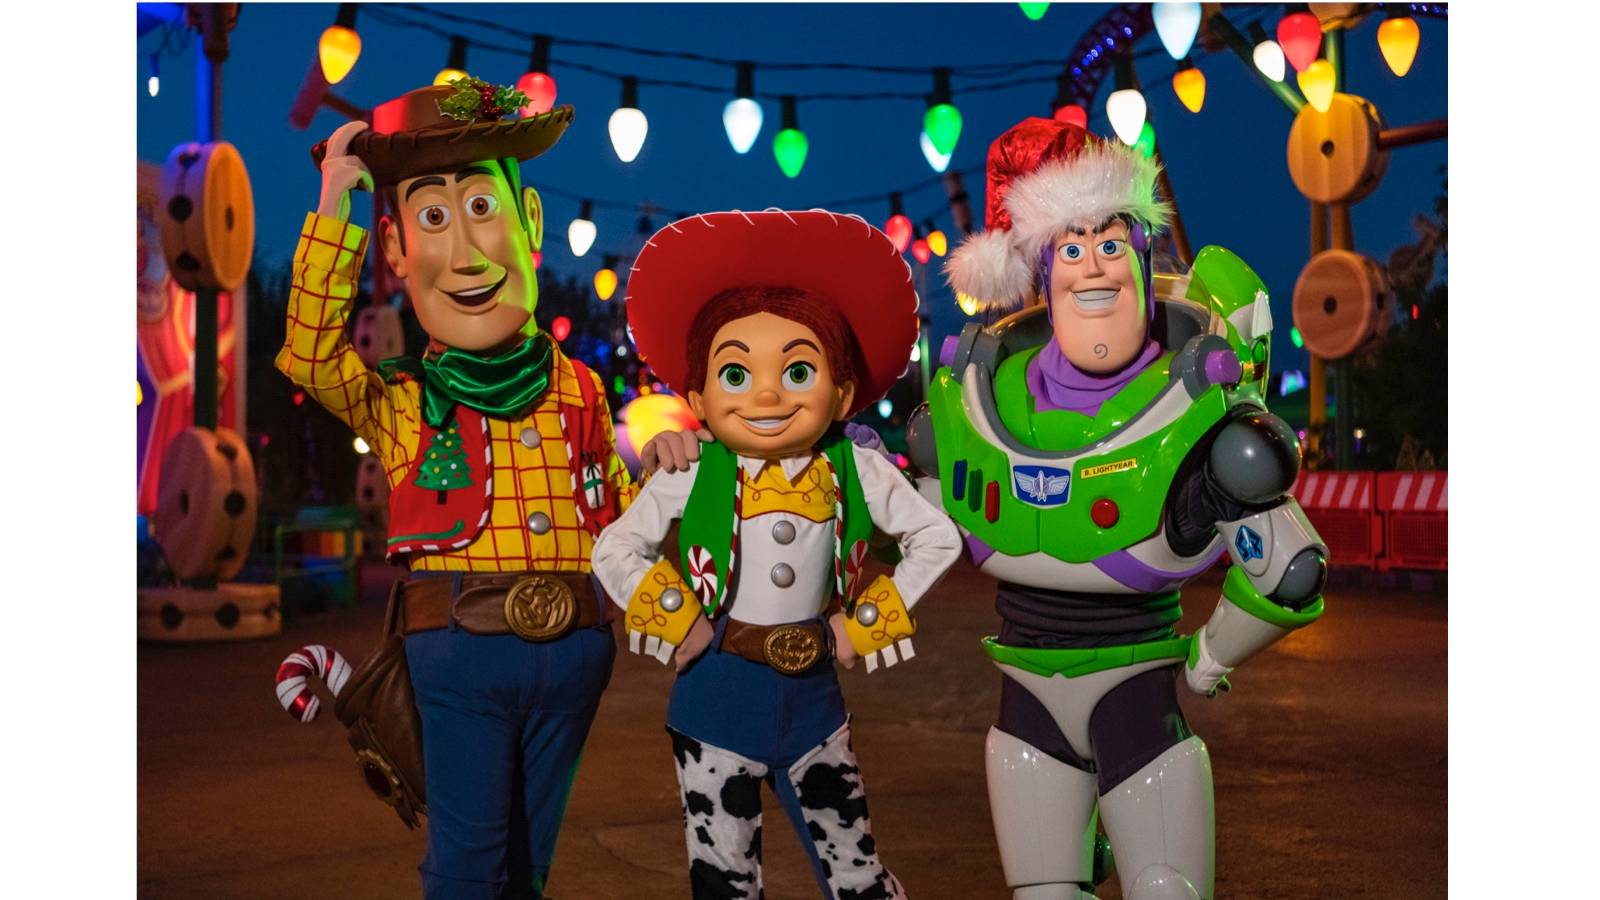 VIDEO - Sneak Peek at the holiday decor coming to Toy Story Land